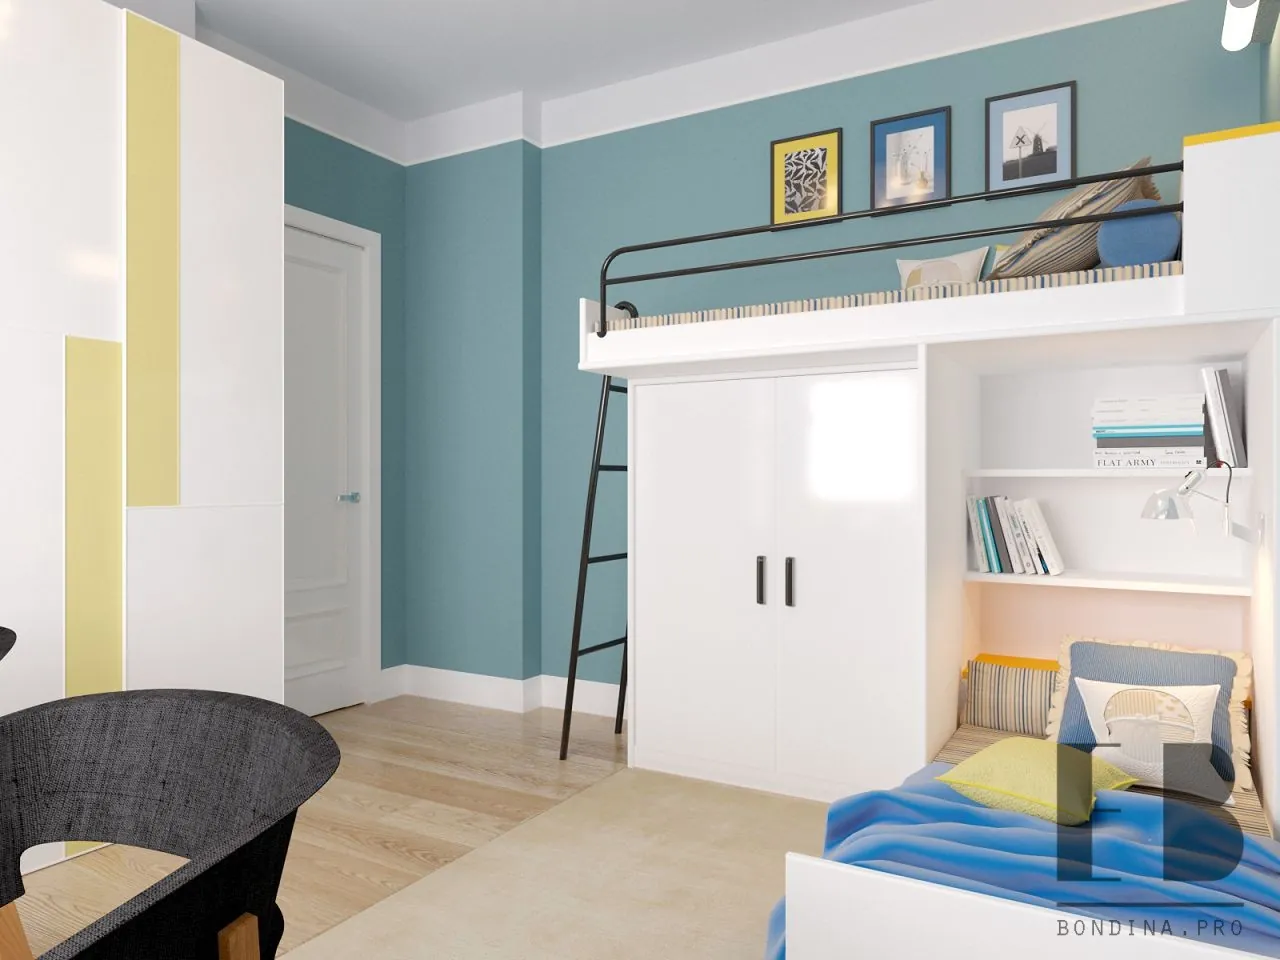 Boys shared bedroom in blue color with twin bunk